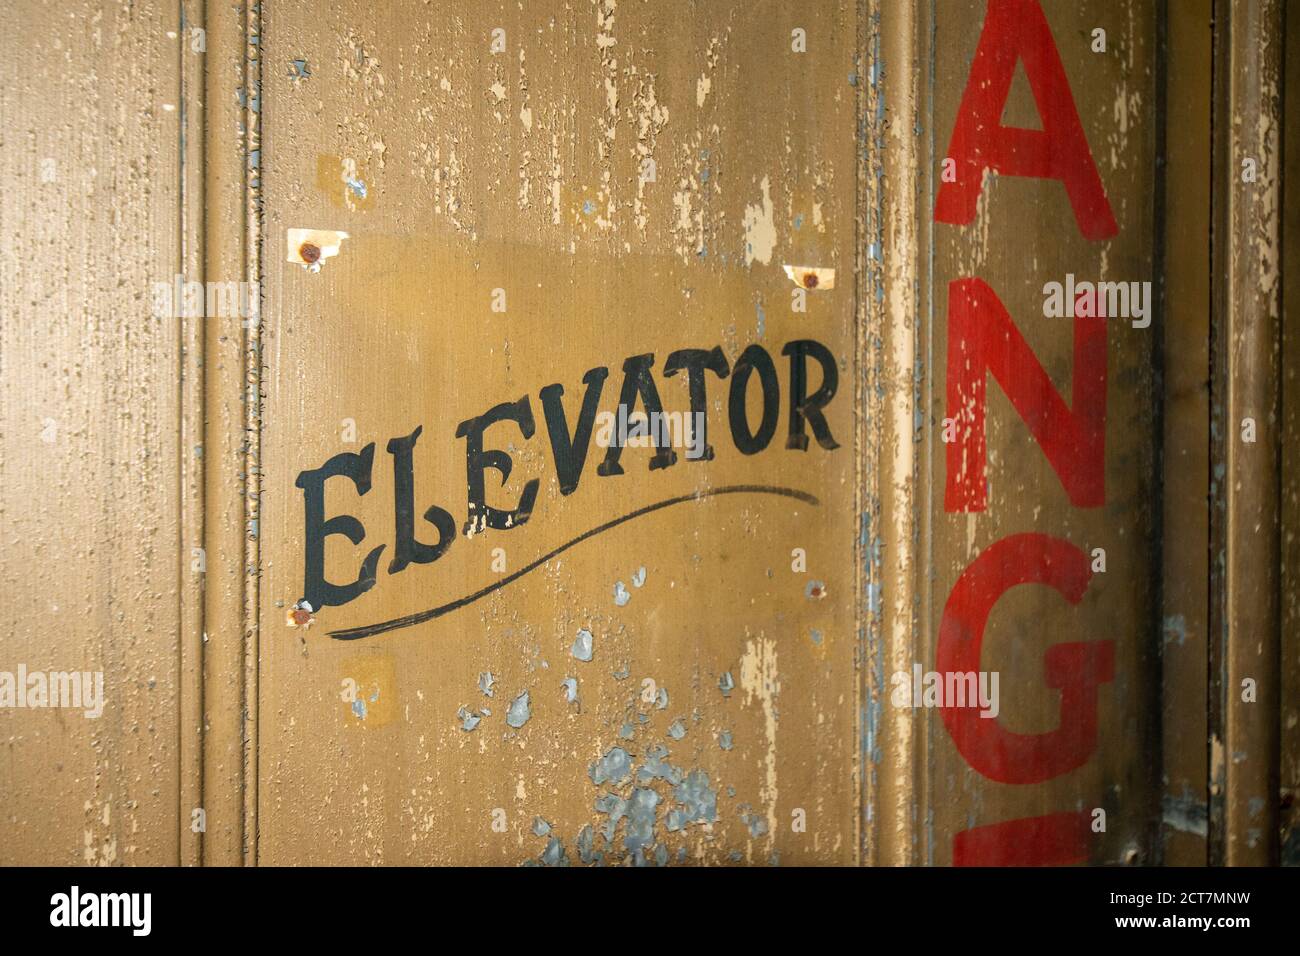 An Old Fashioned Door With Text That Says Elevator on It Stock Photo